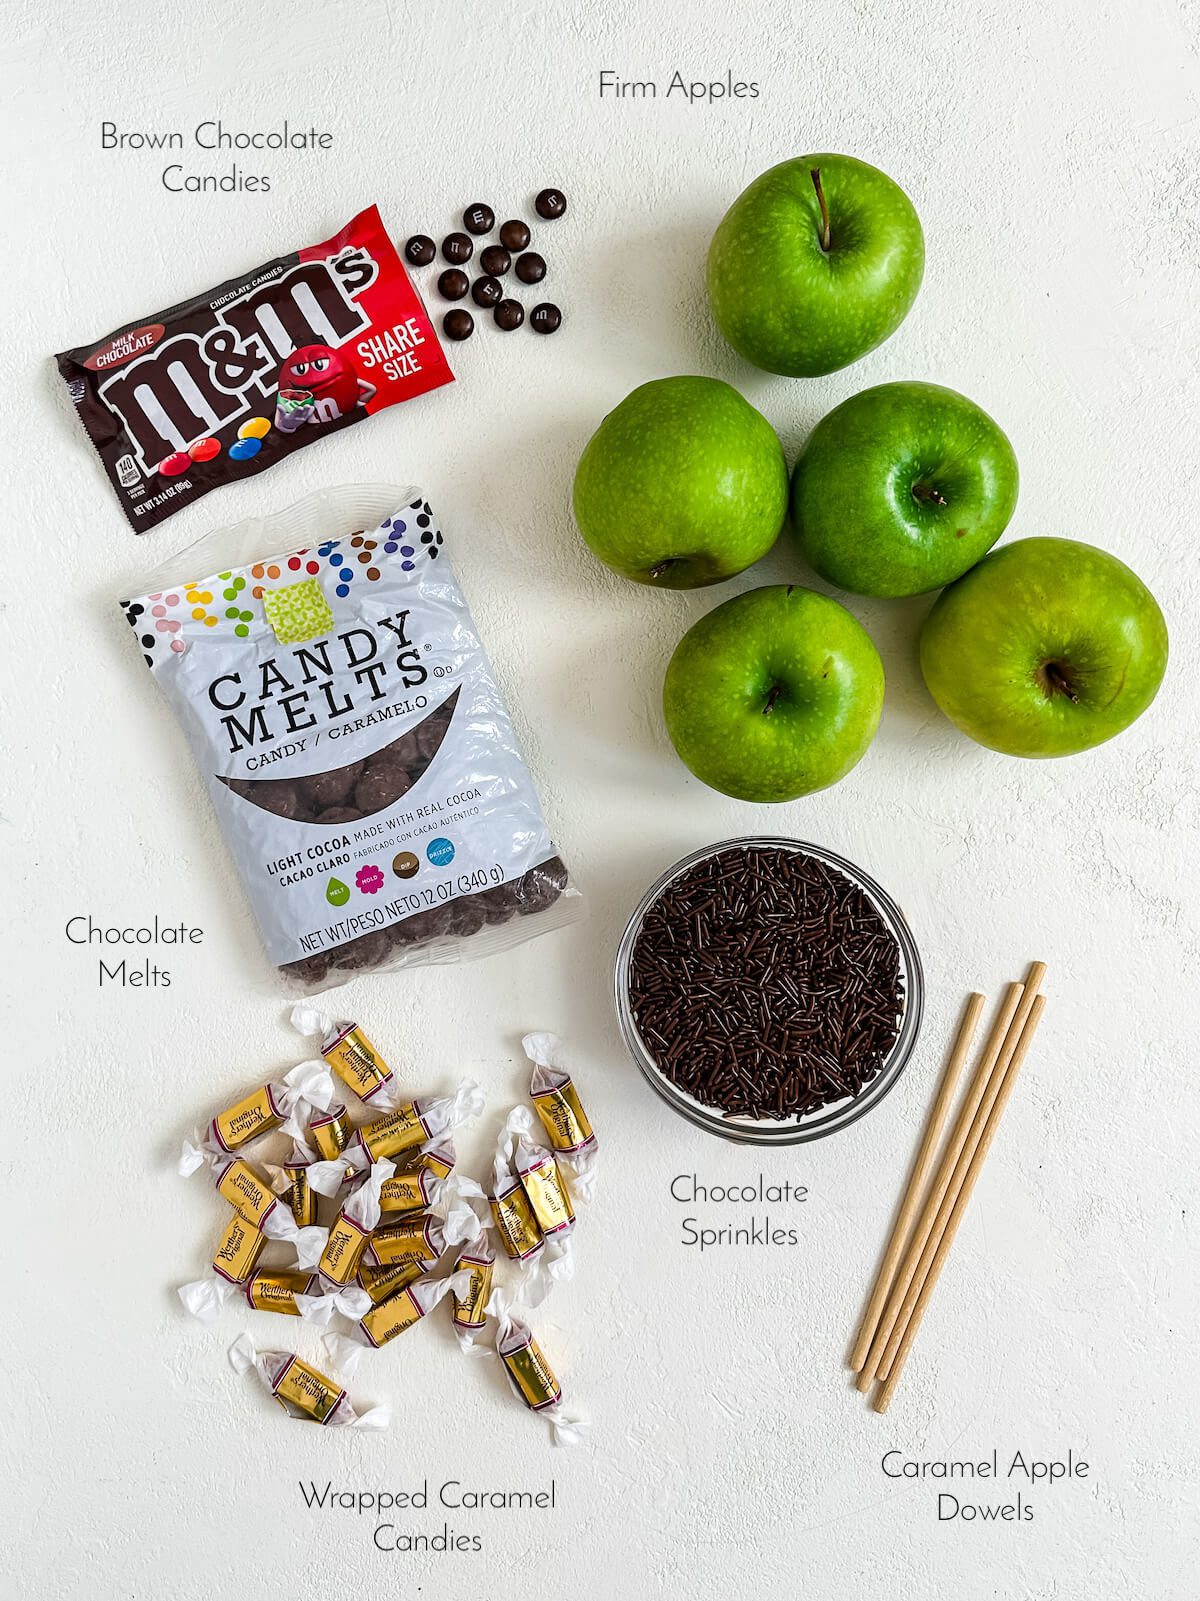 Ingredients for spiderweb caramel apples, including chocolate candies, chocolate melts, caramels, apples, sprinkles and caramel apple dowels.